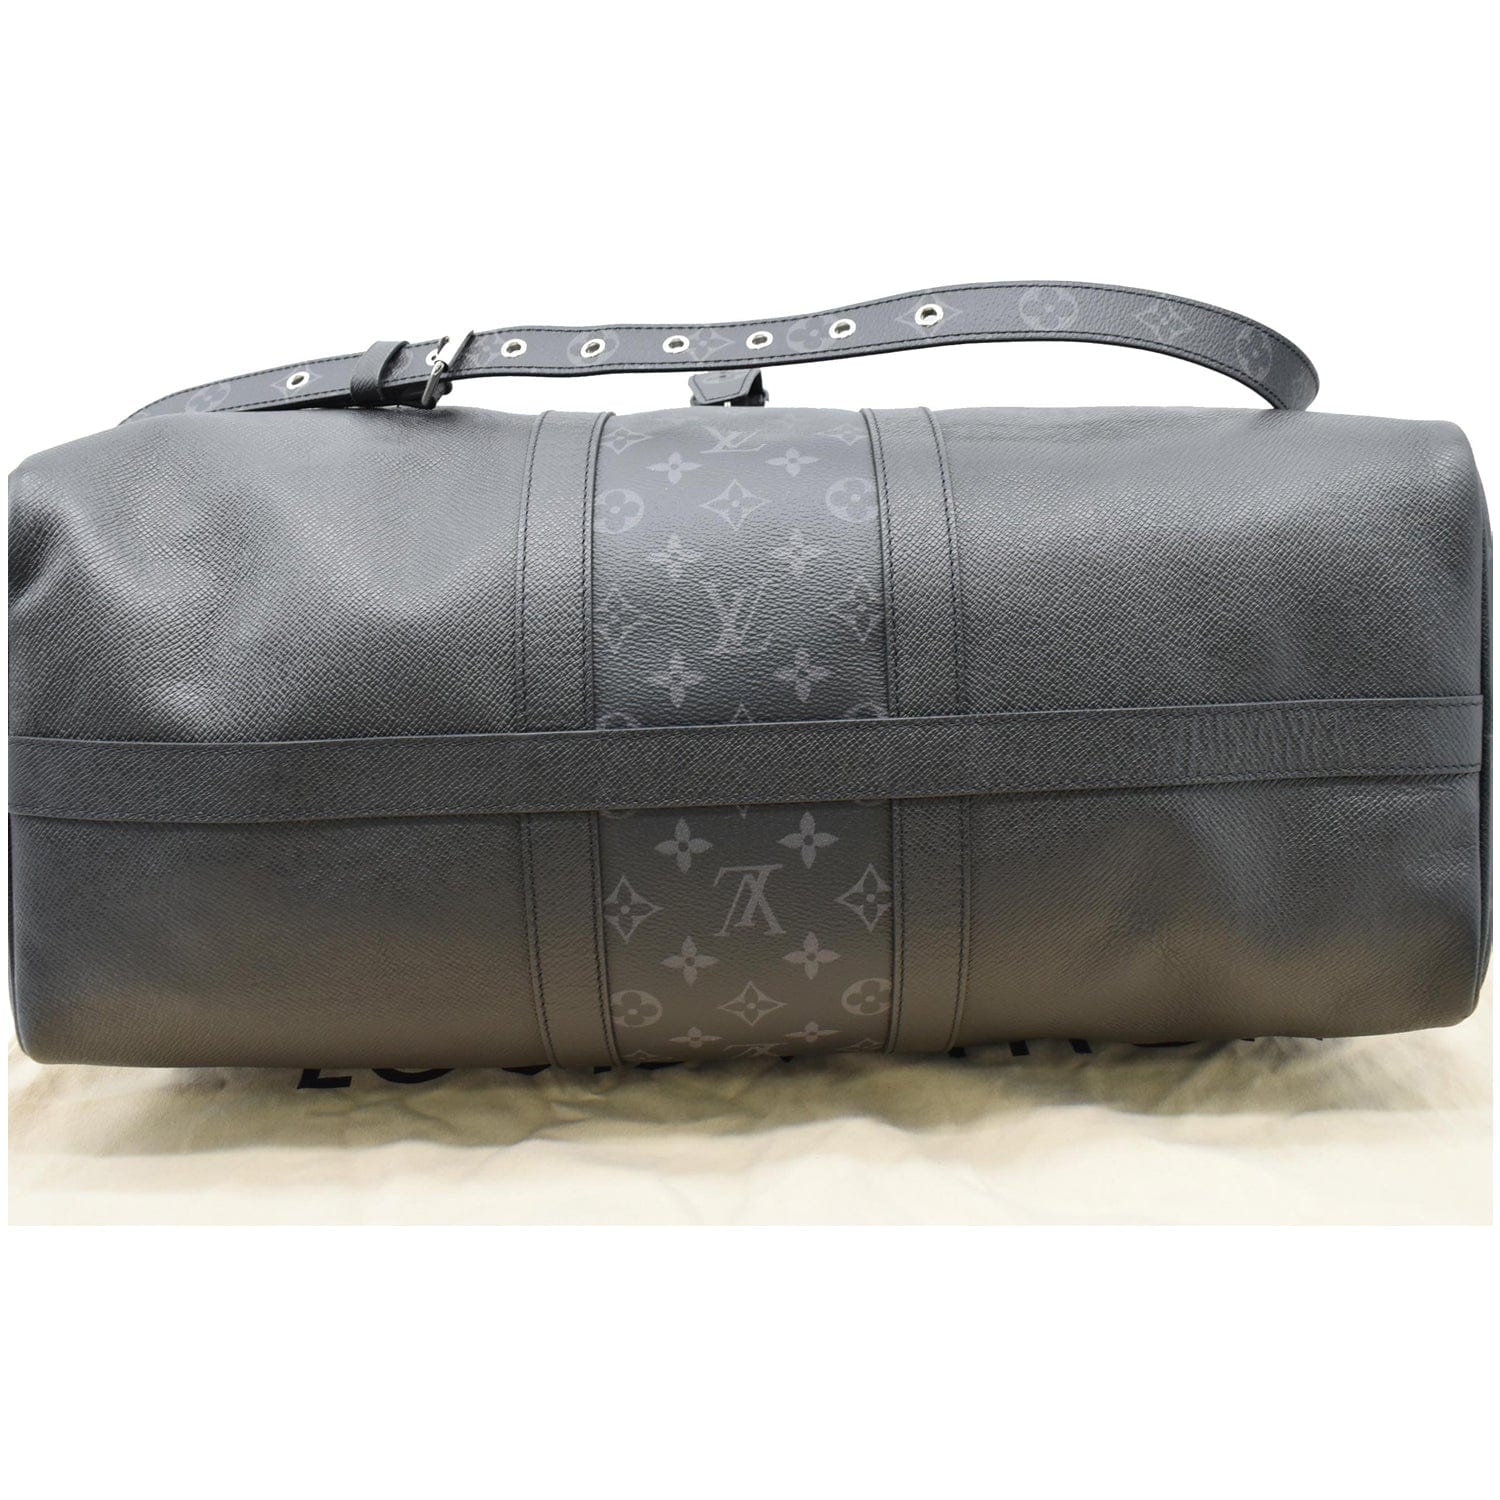 Louis Vuitton Keepall 50 Travel bag in black épi leather at 1stDibs